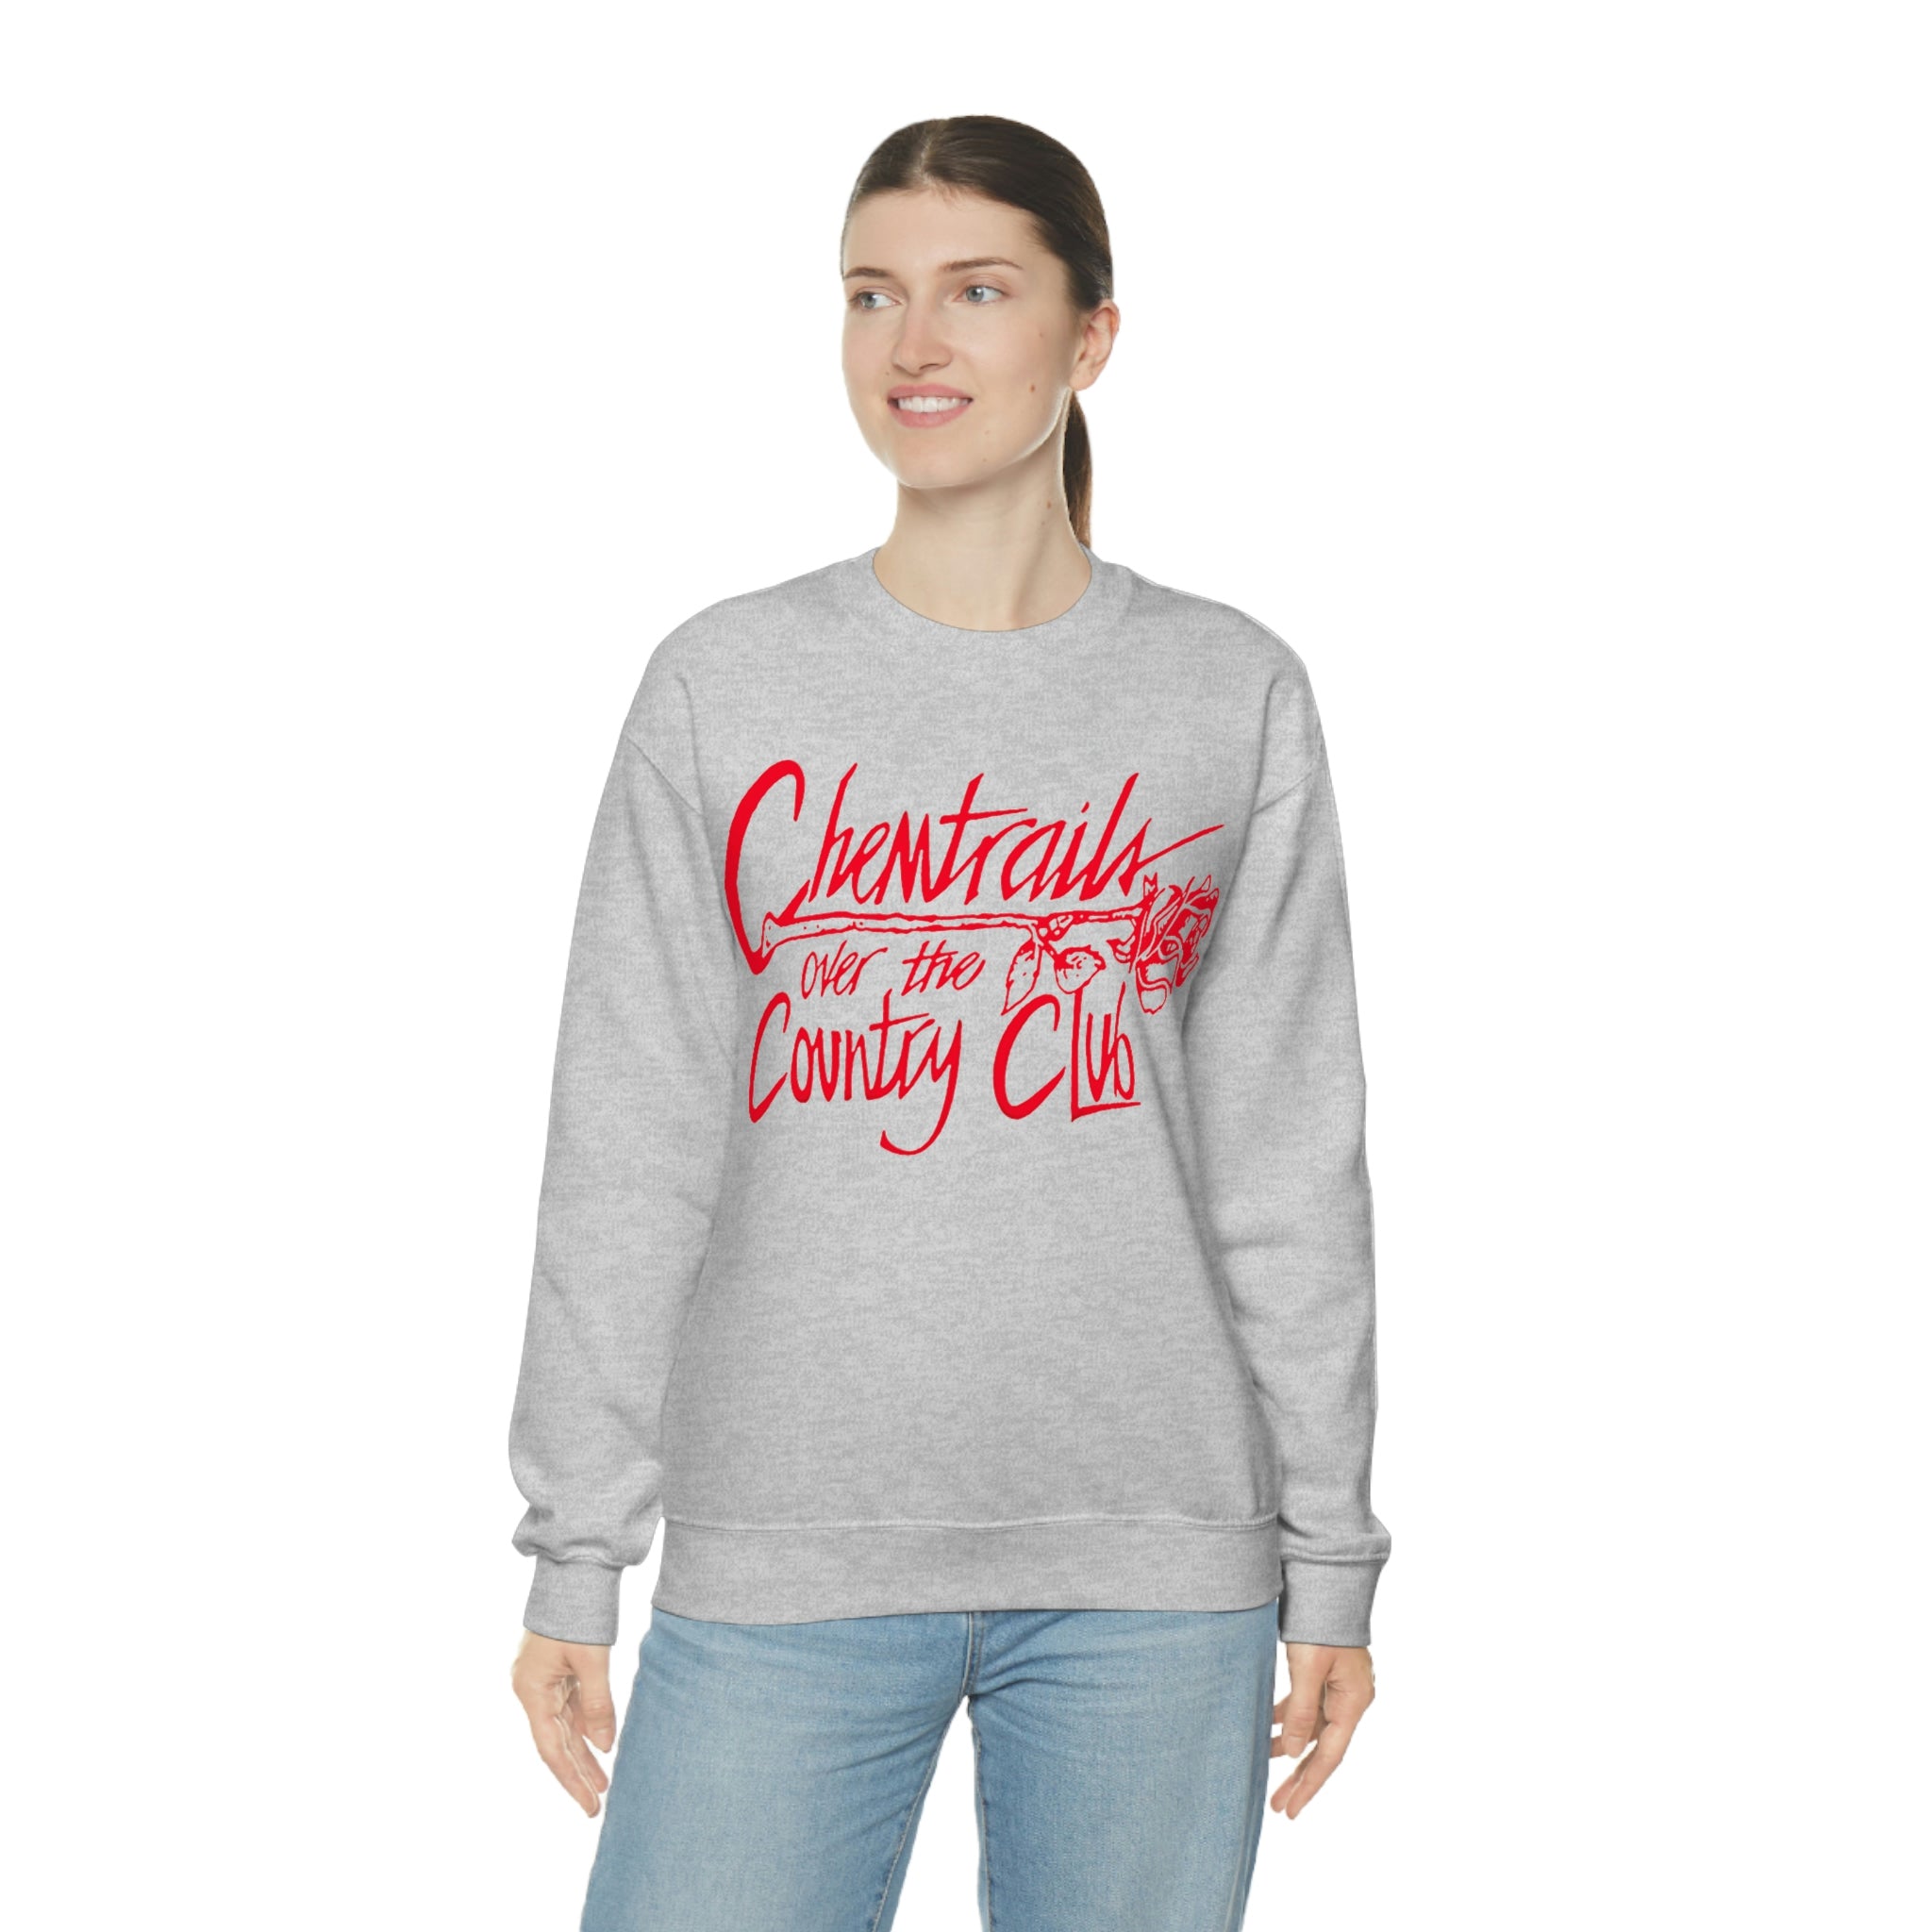 lana del rey shirt chemtrails over the country club Sweatshirt